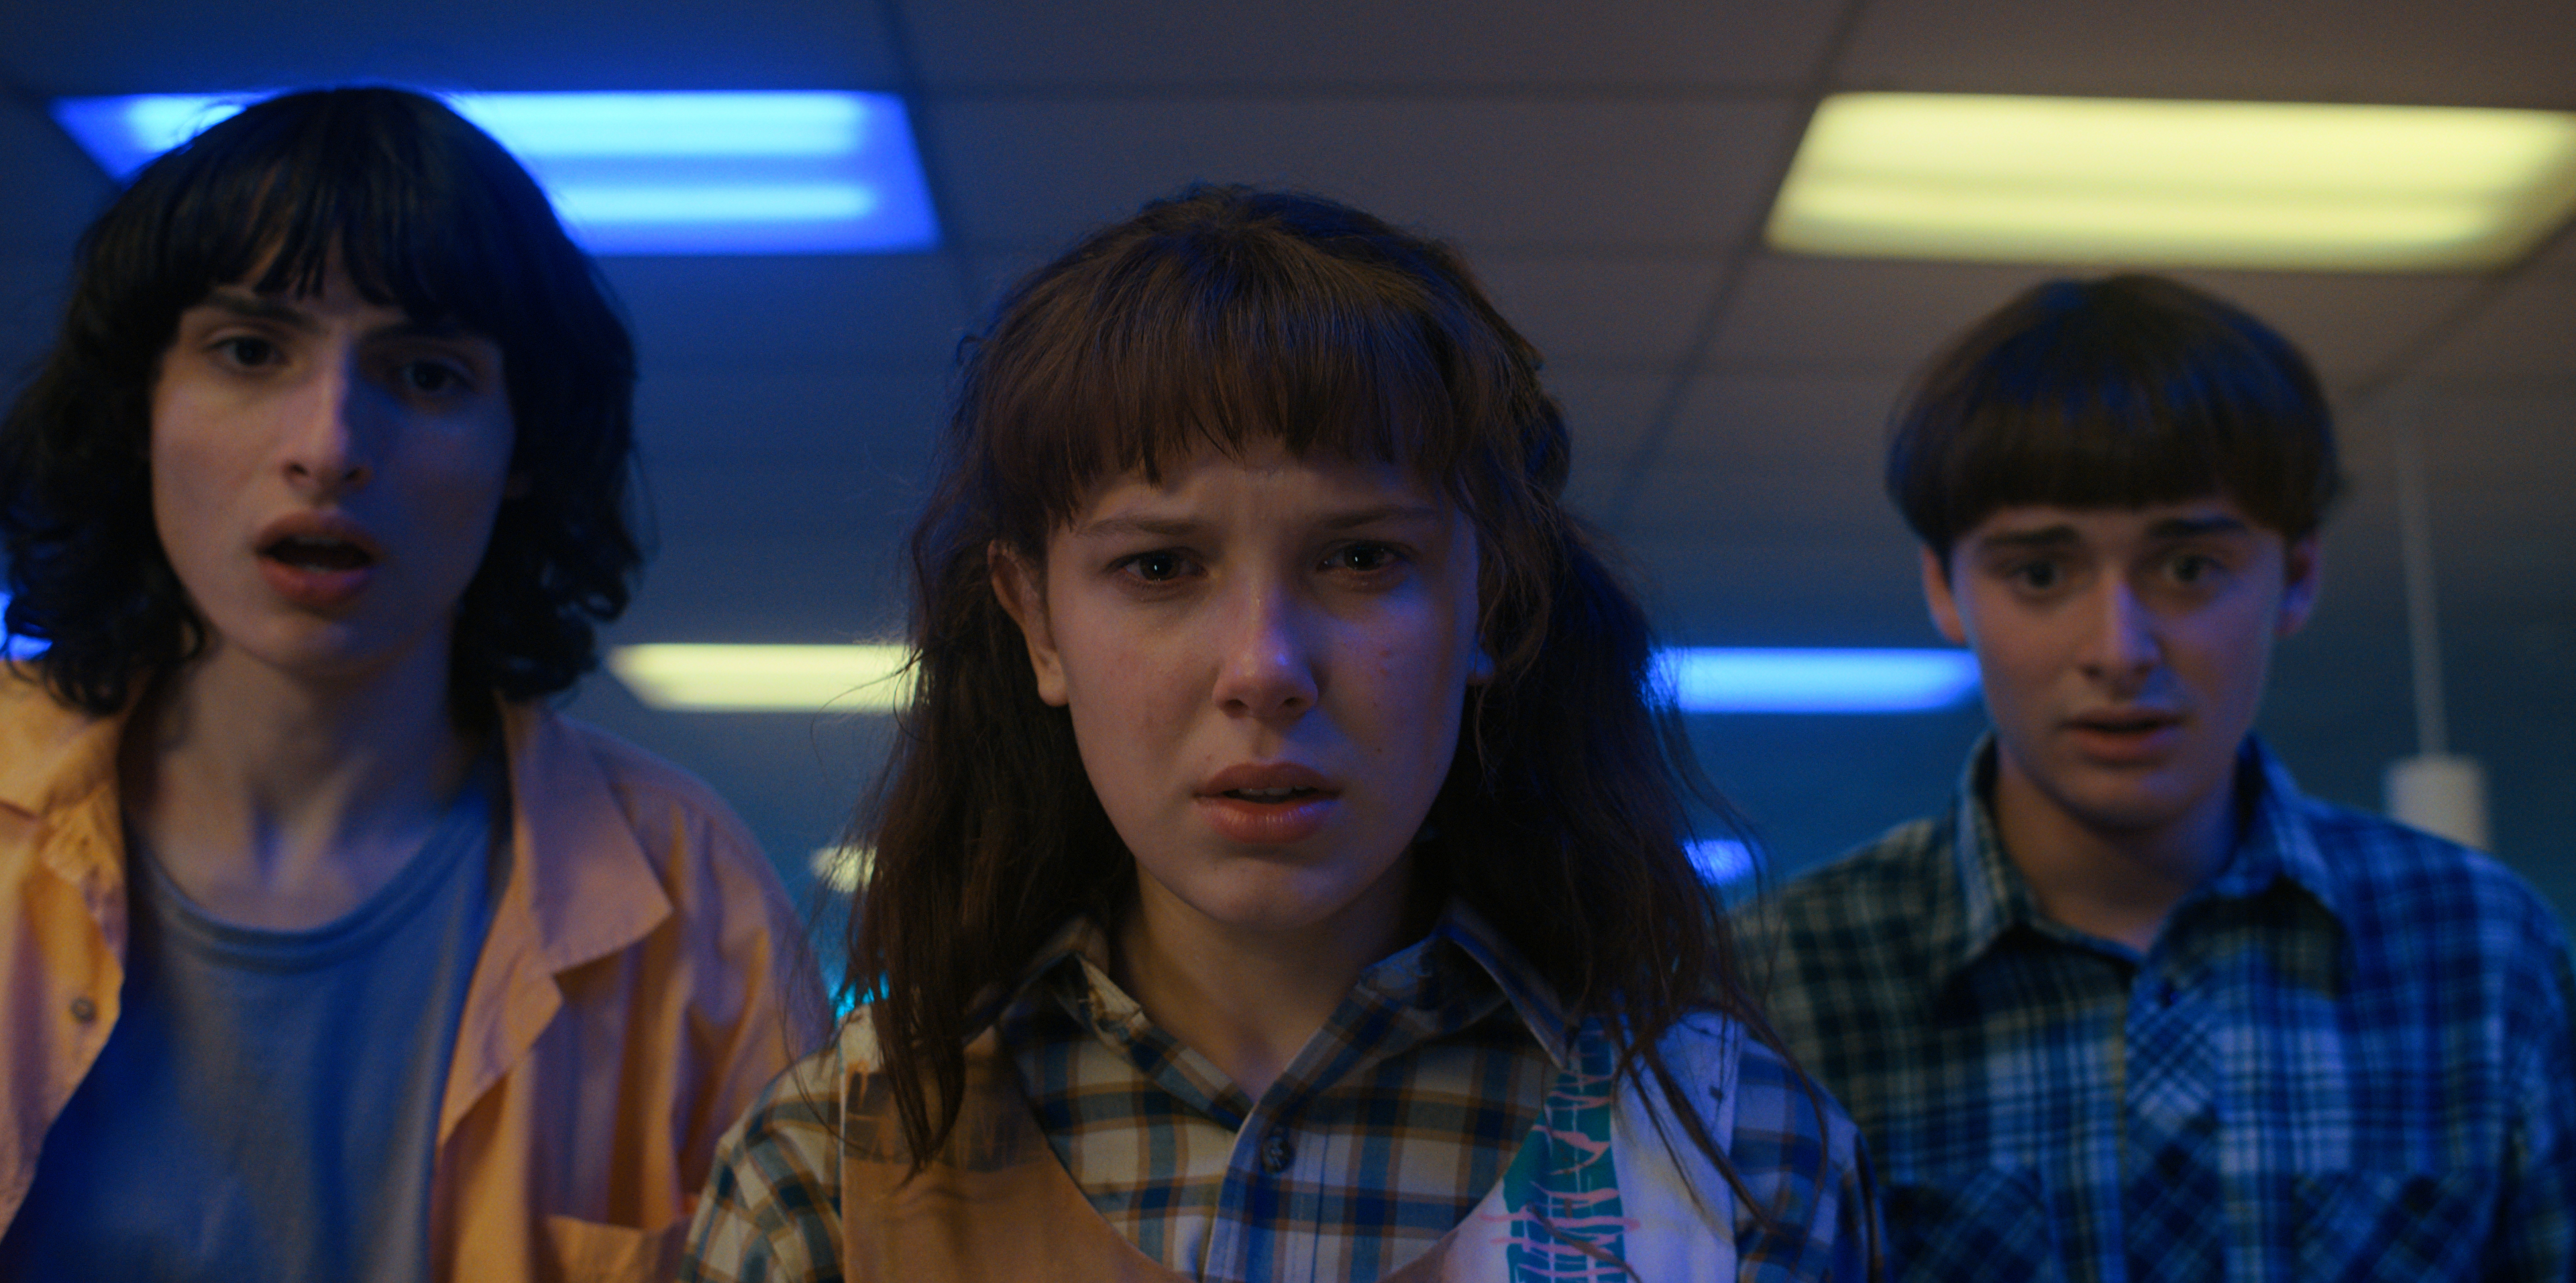 As 'Stranger Things' Season 4 concludes, Twitter brims up with